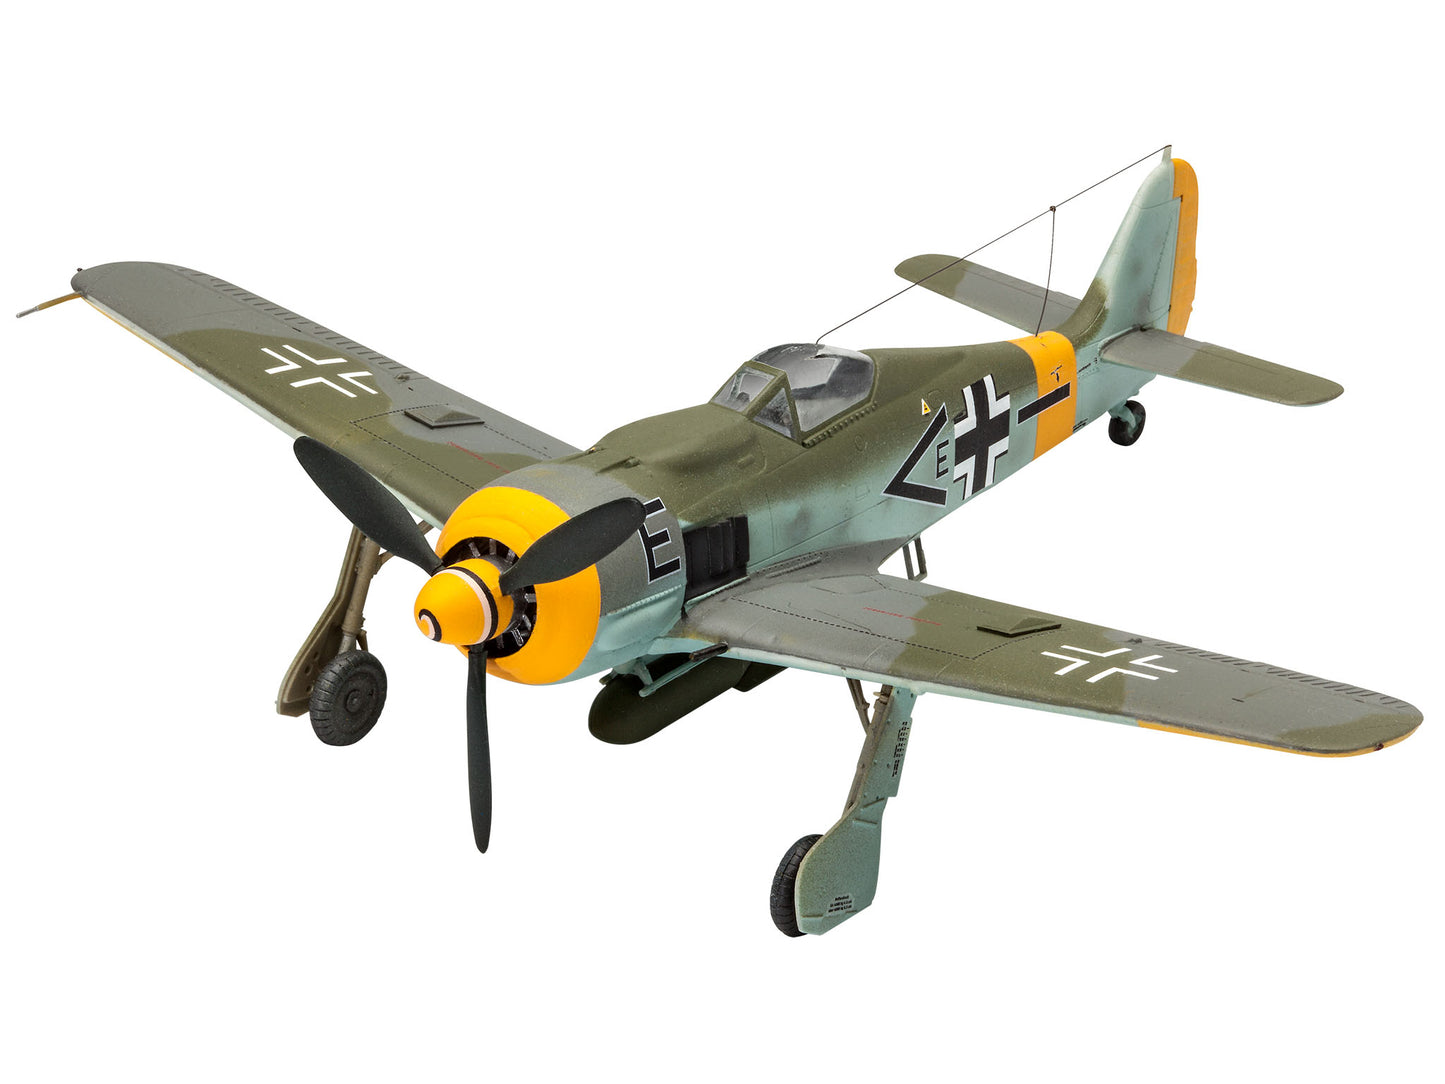 Revell Focke Wulf Fw190 F-8 1:72 Scale Airplane Model Kit With Paints & Glue